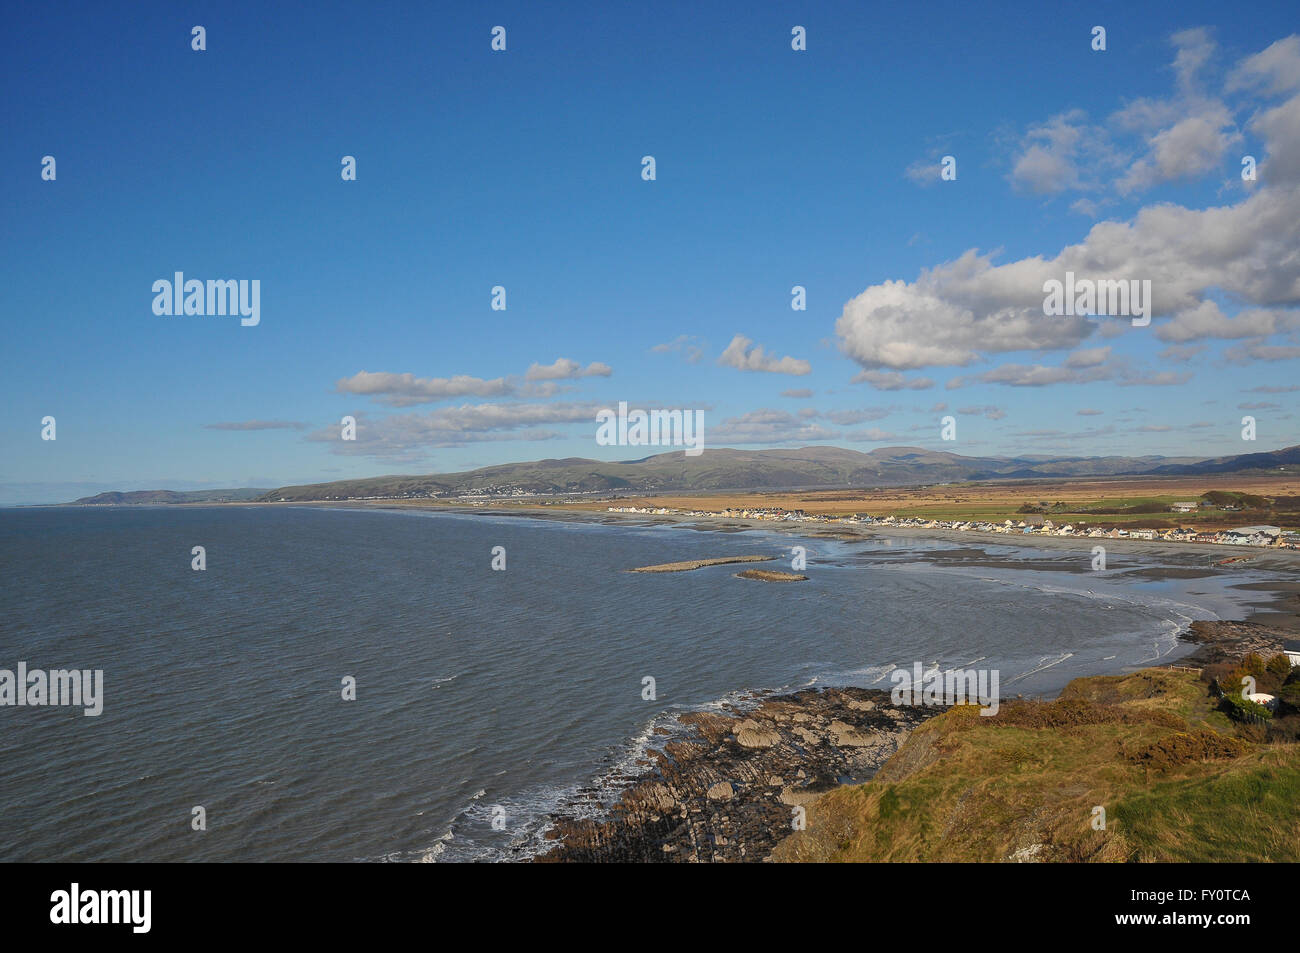 A coastal view of Borth, Ceredigion looking north on a sunny day with white clouds against a blue sky. Stock Photo